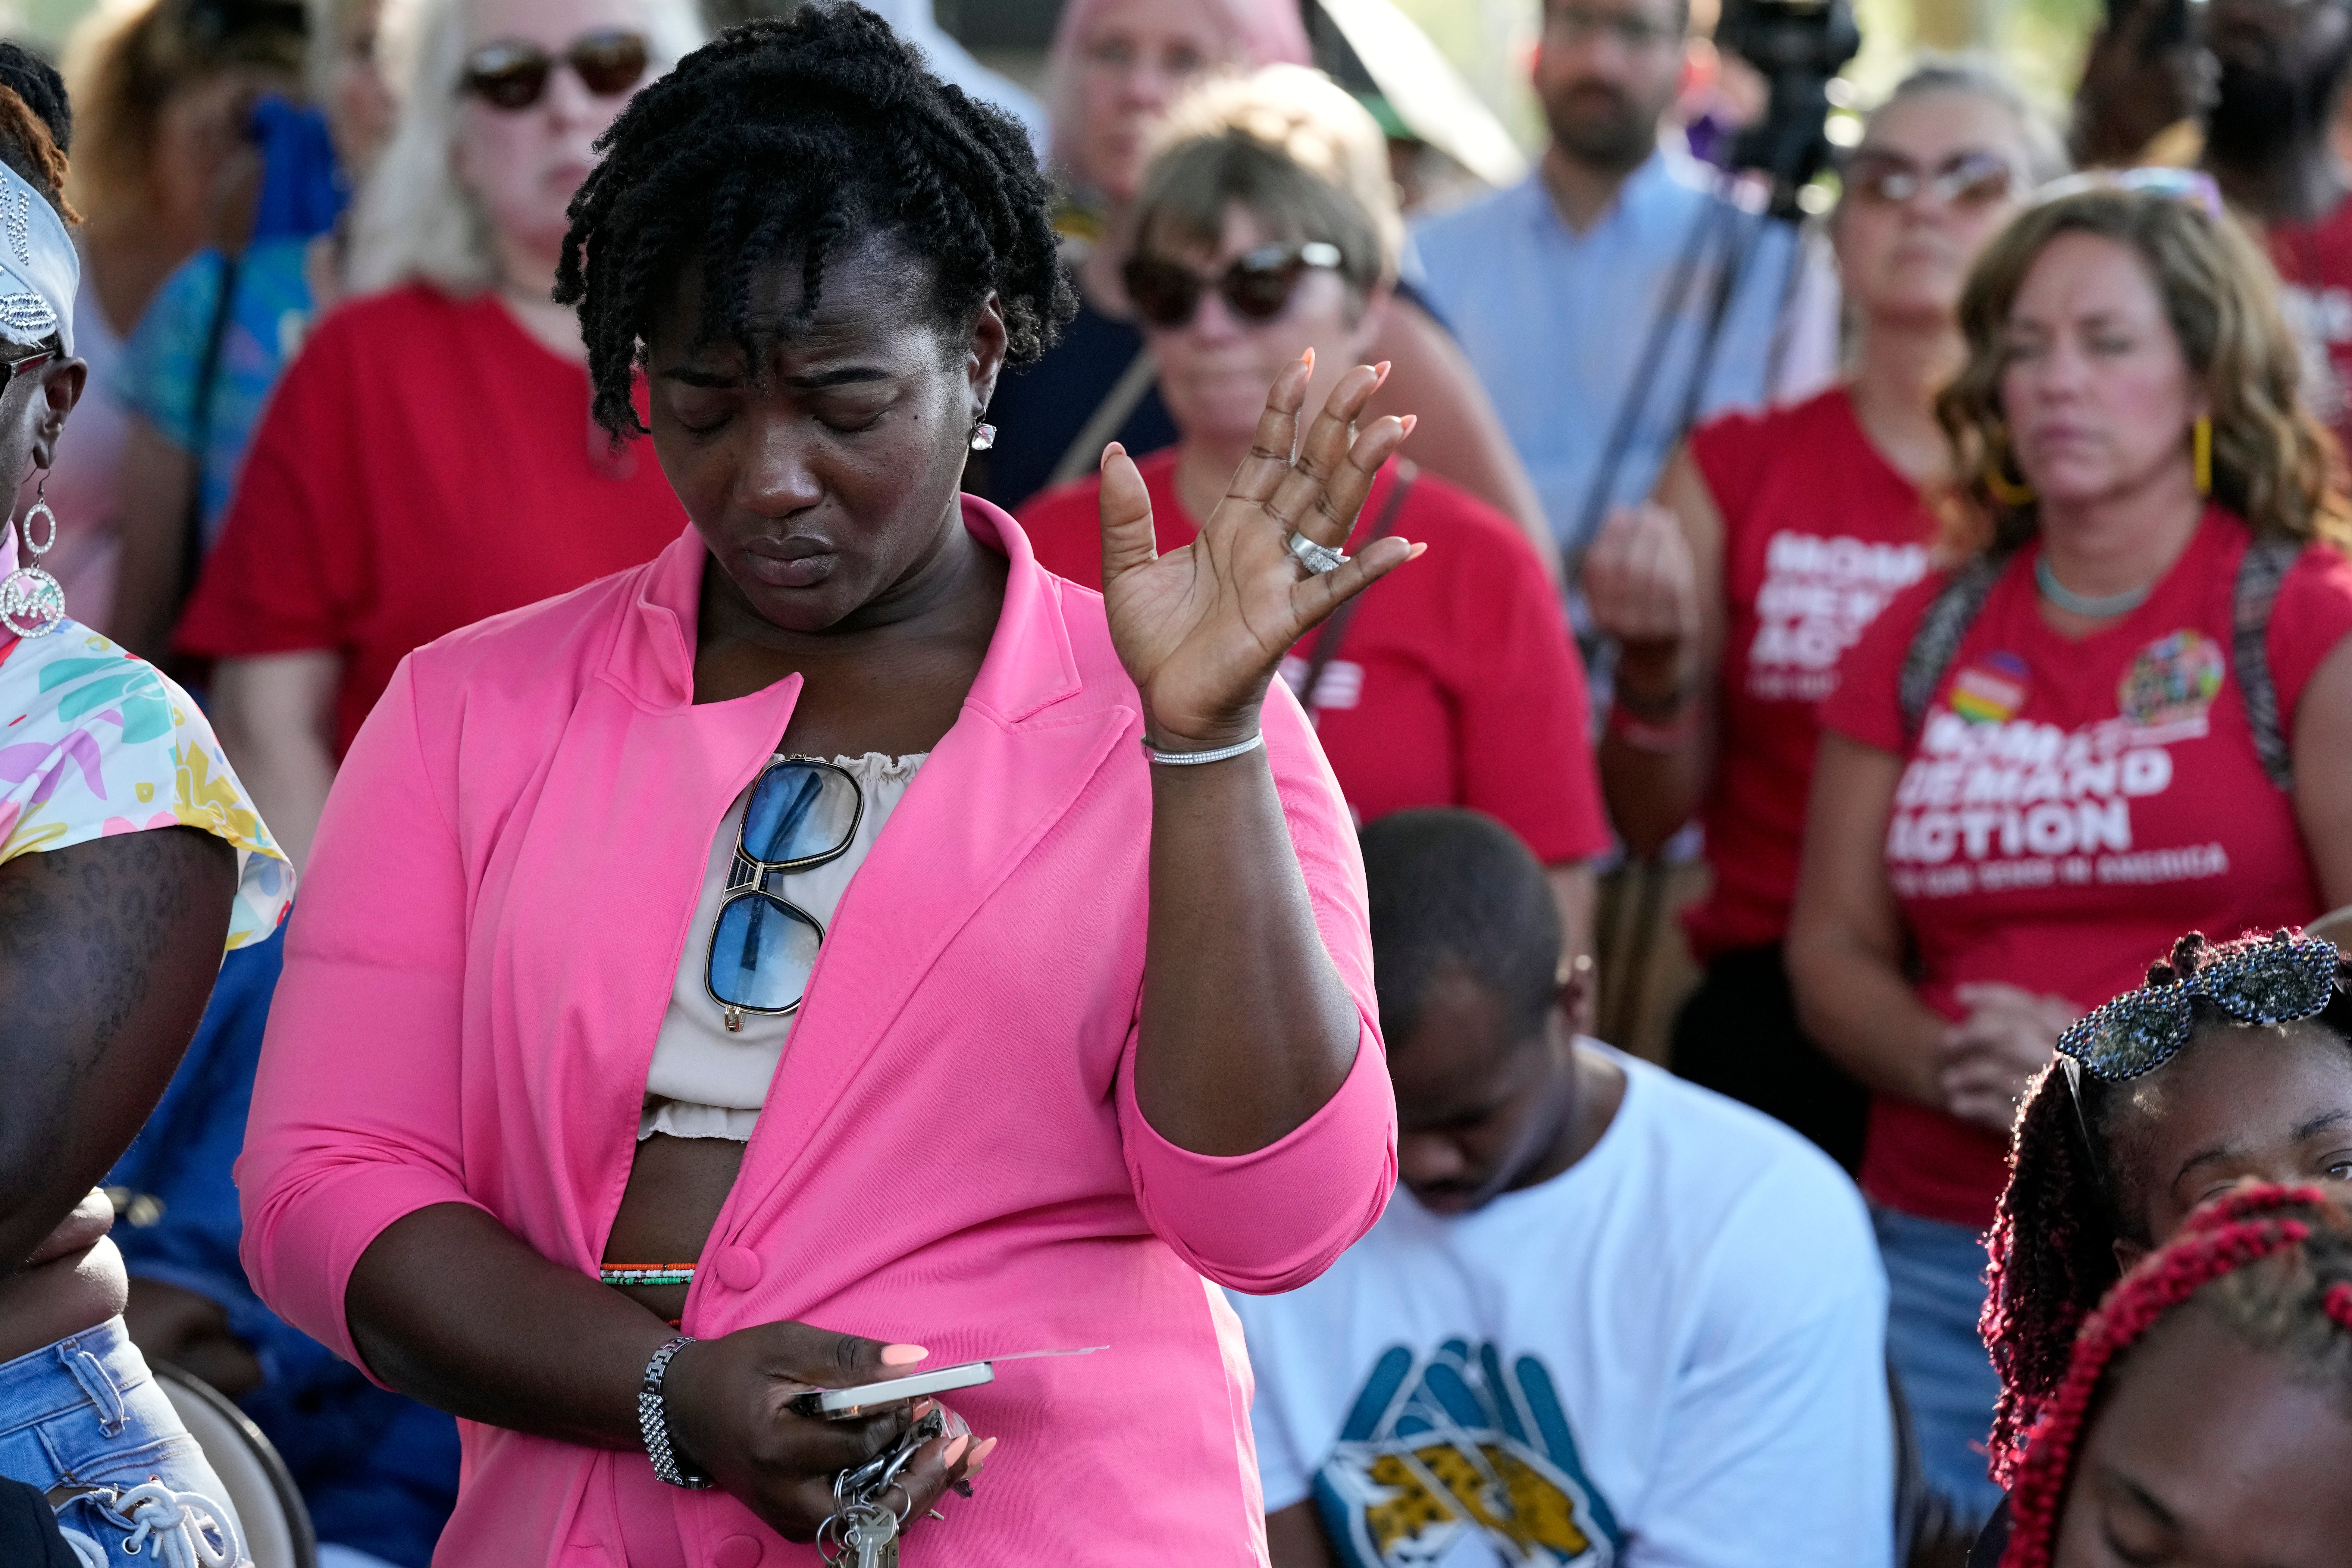 A woman attending a vigil for the victims of Saturday's mass shooting bows her head in prayer on Sunday